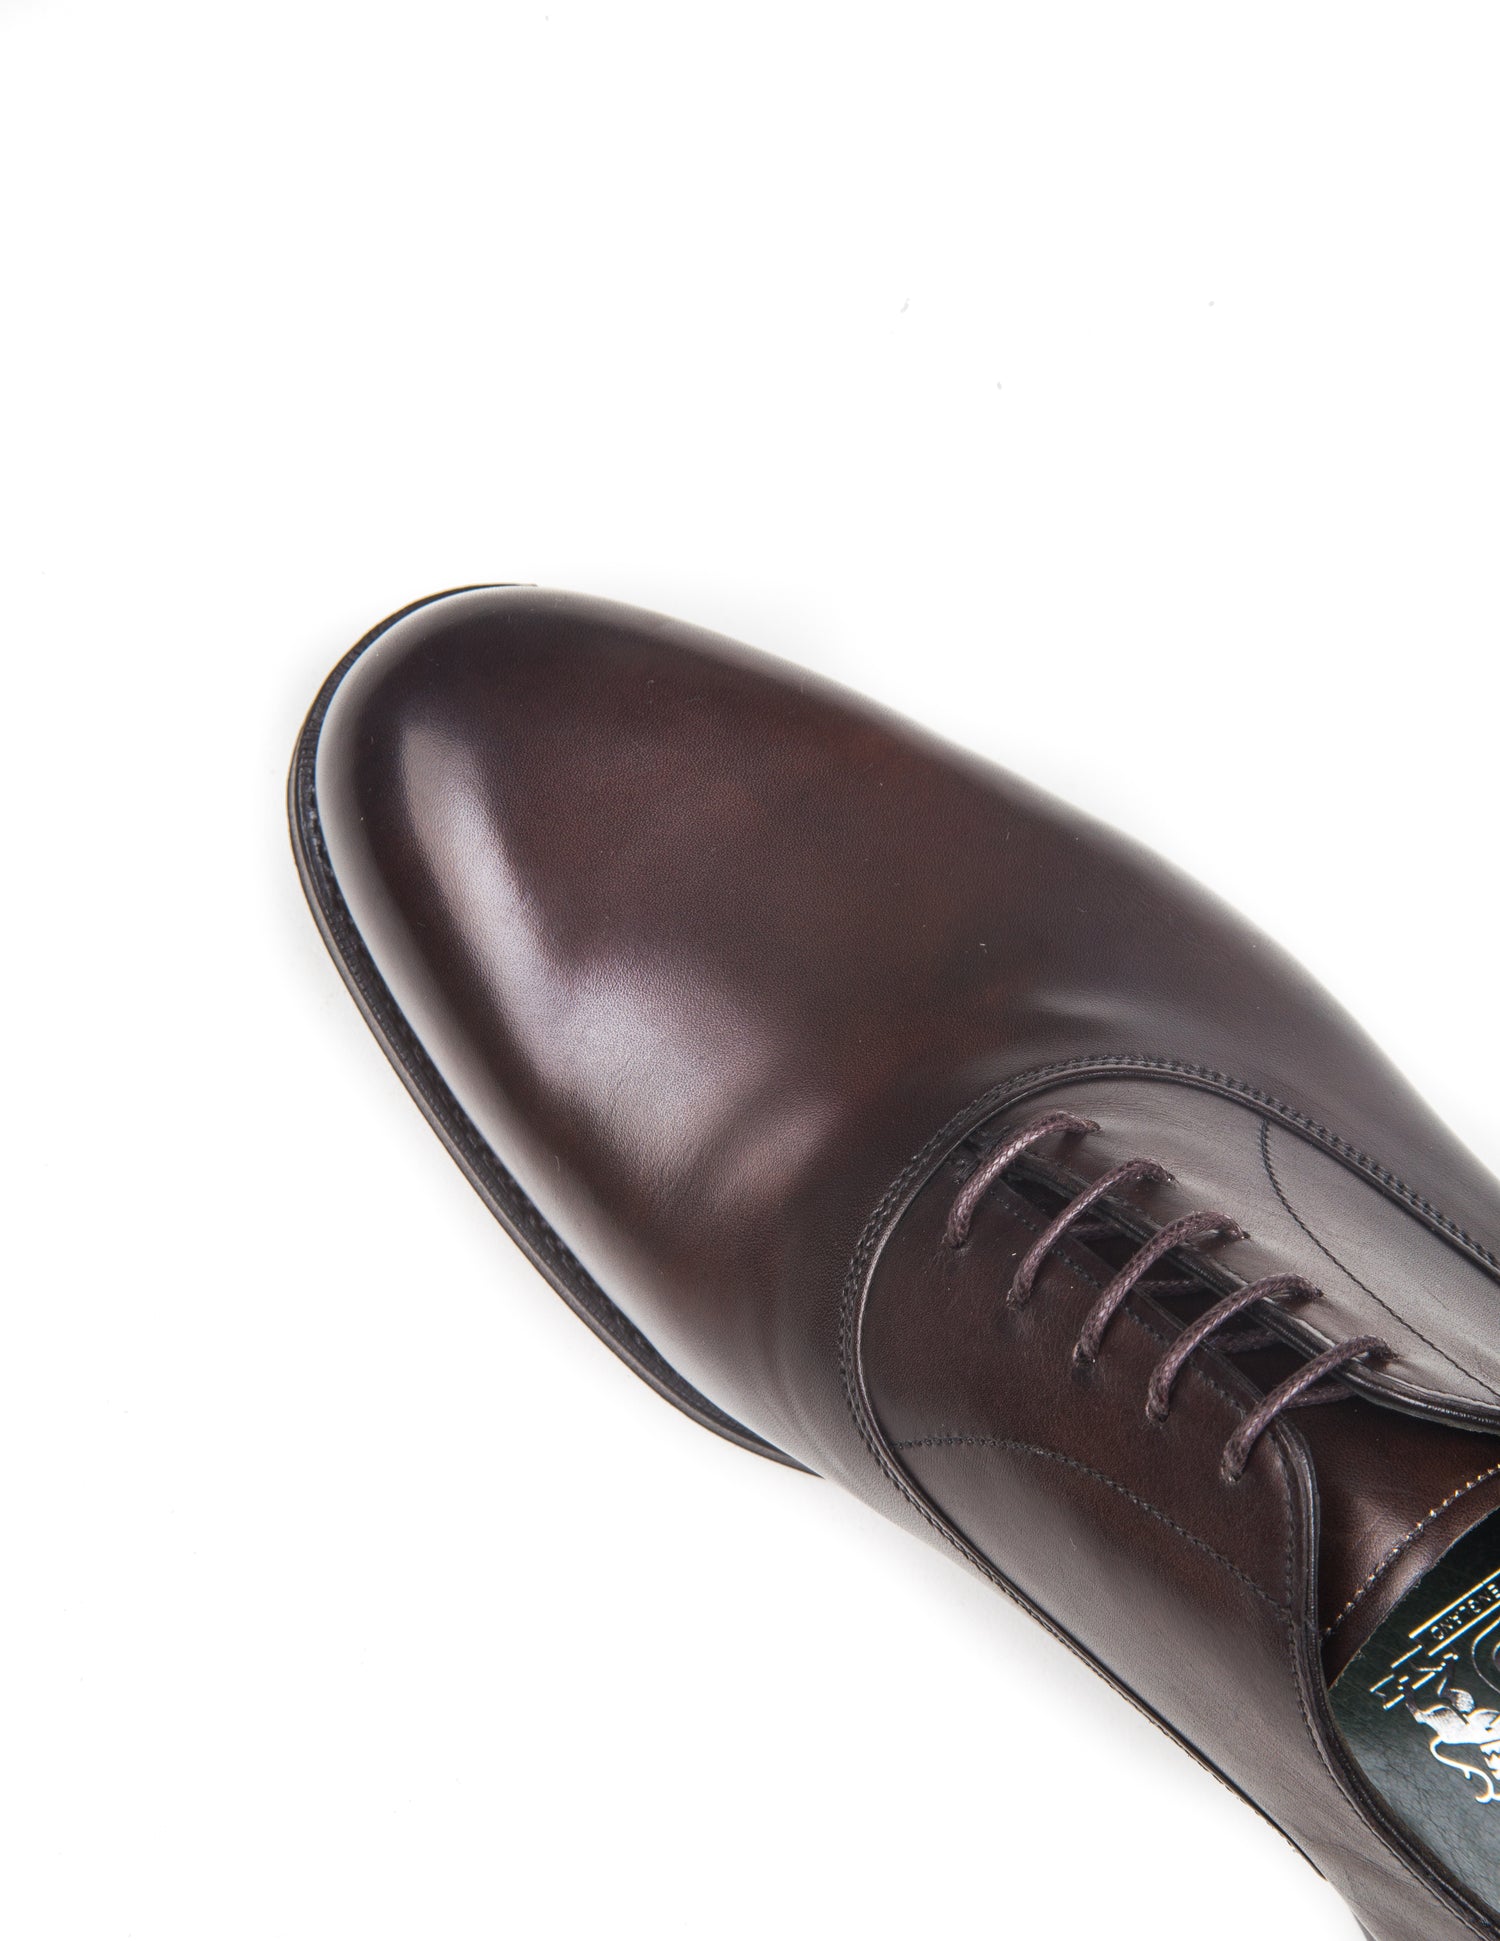 Detail of Joseph Cheaney Welland Oxford Shoes in Mocha Calf Leather toe box and laces